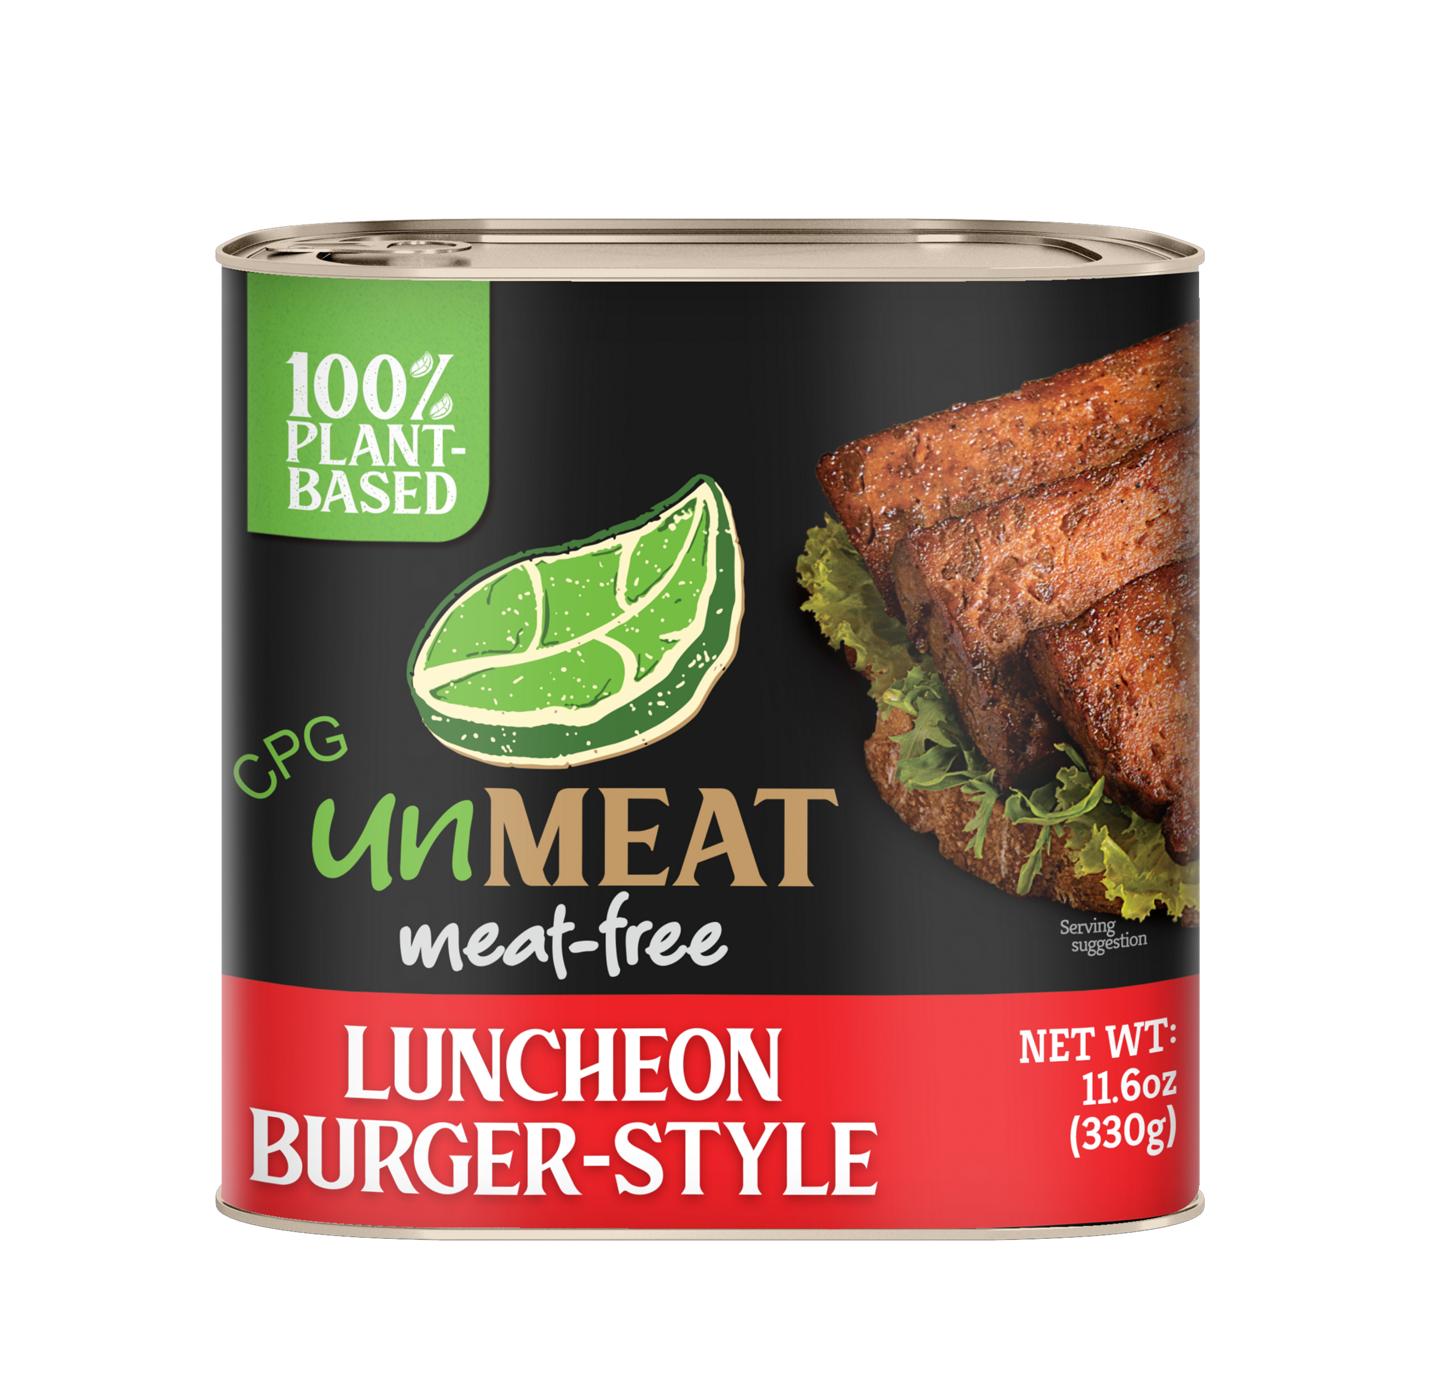 Unmeat Meat Free Luncheon Burger Style; image 1 of 2